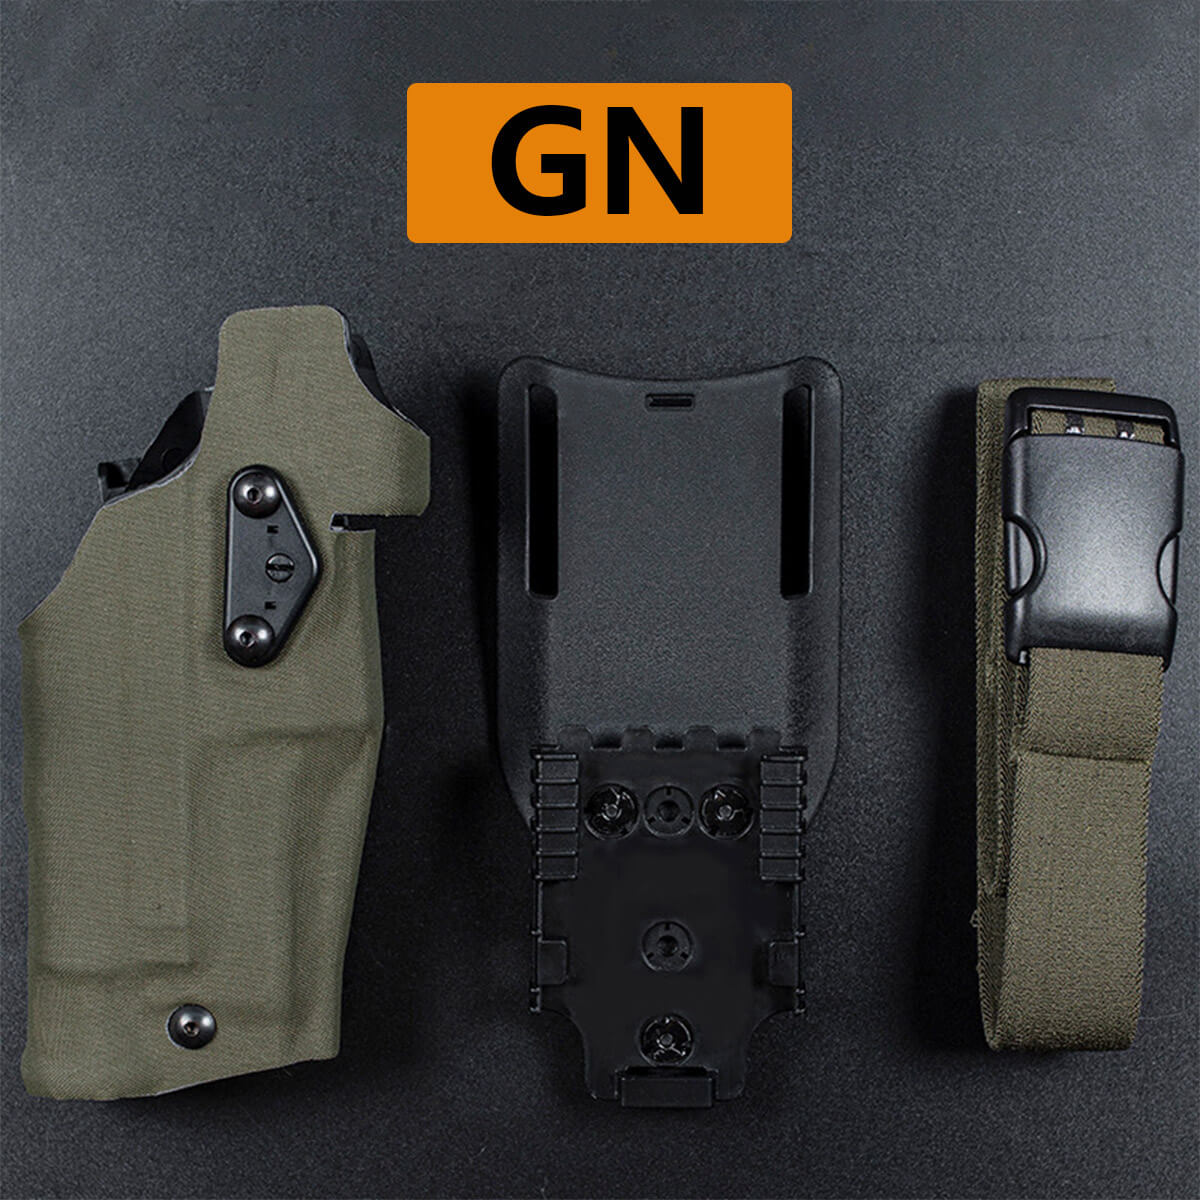 6354DO Tactical Universal Quick Release Gun Holster Pistol Carry Case For Glock 17 19 with X300 X300U Airsoft Weapon Flashlight-Tactical Accessories-Kublai-green-Kublai